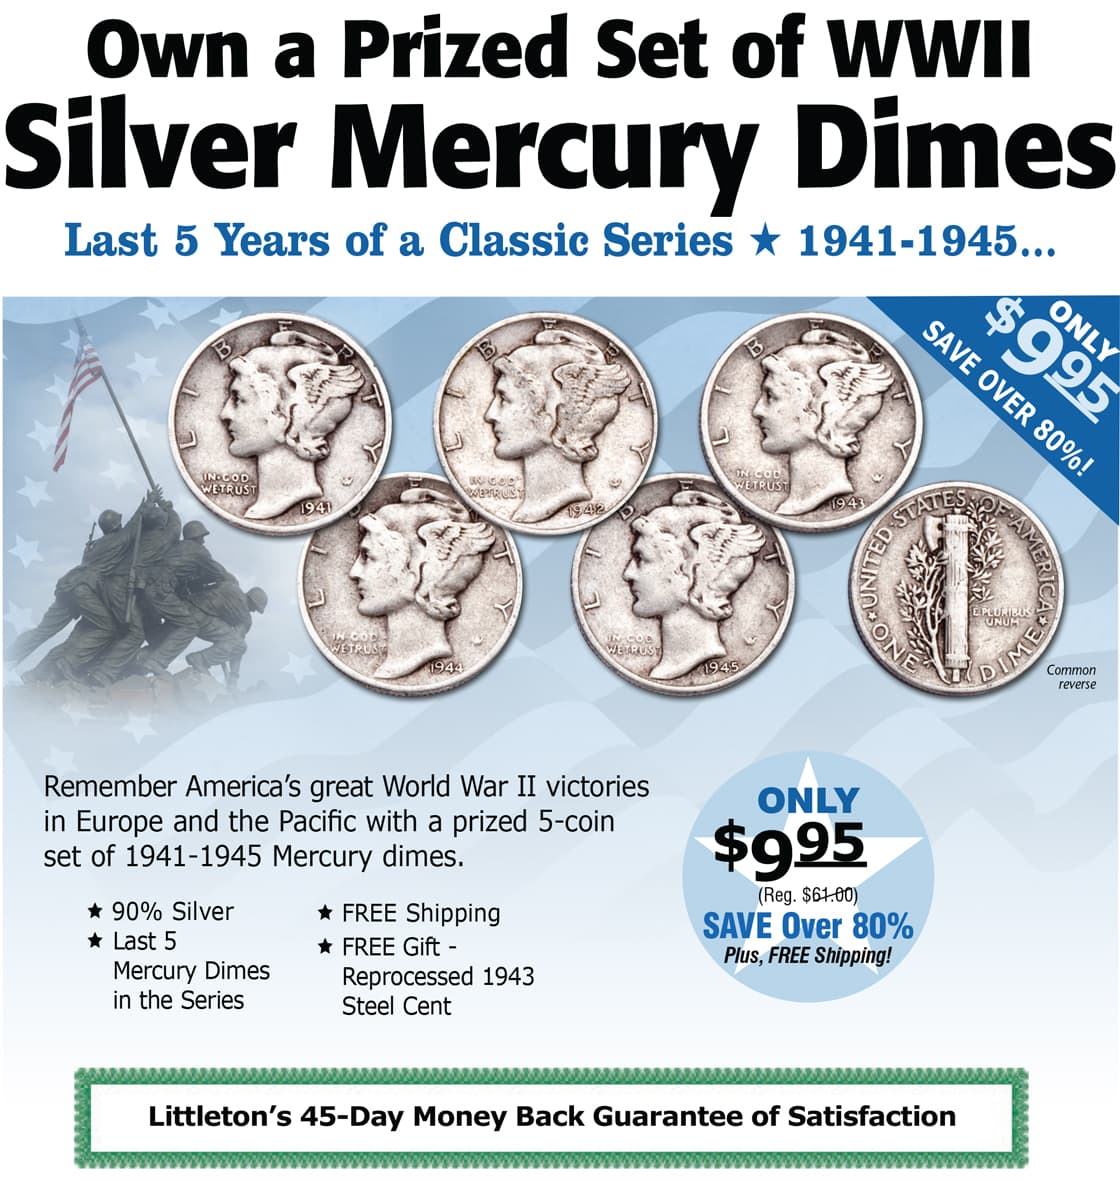 Own a Prized Set of WWII Silver Mercury Dimes!